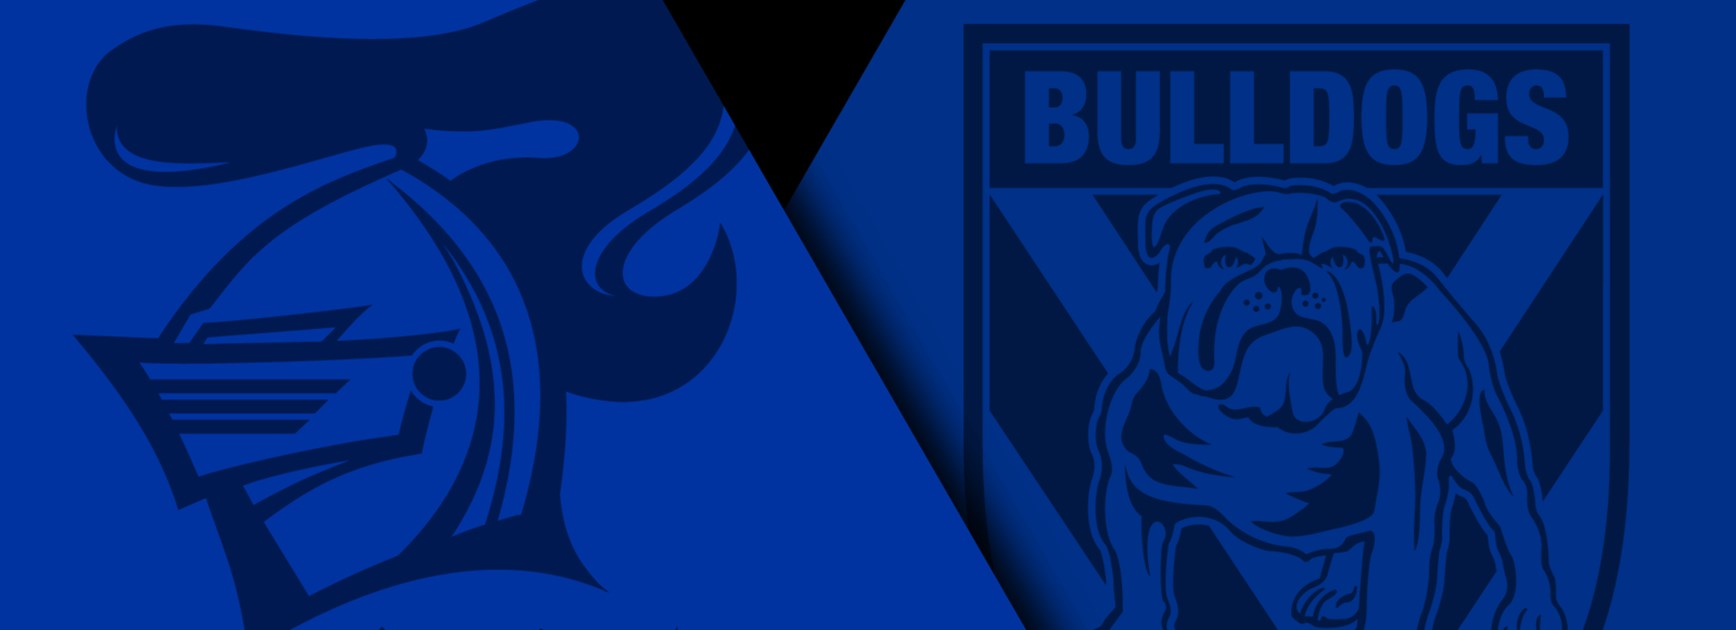 Will the Knights beat the Bulldogs in Round 22?